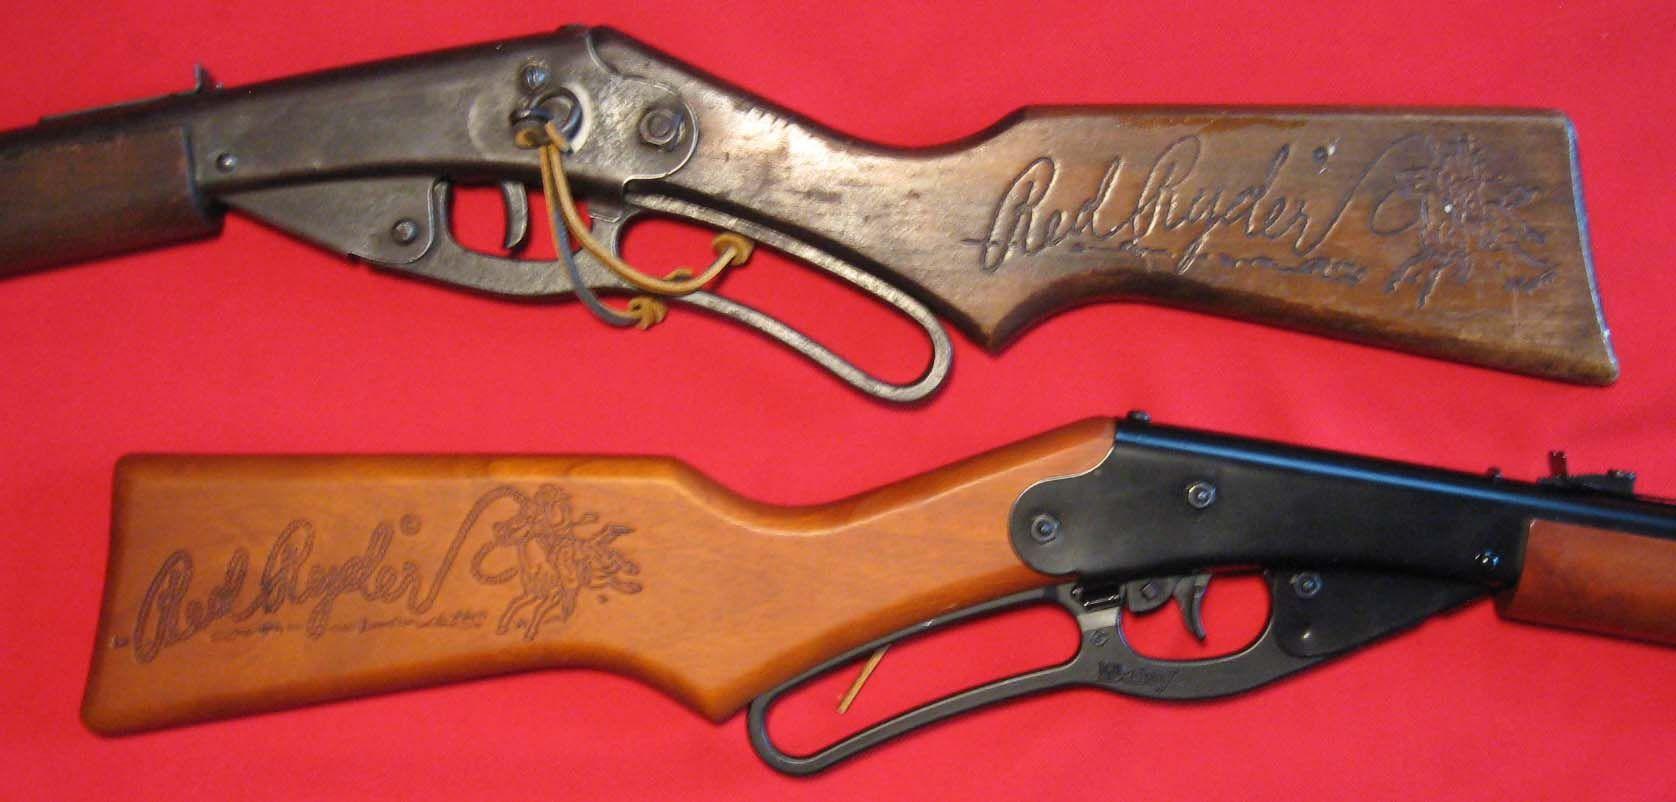 Red Rider BB Gun Logo - The Daisy Red Ryder Carbine, Then, and Now | A Tale of Two Thirties